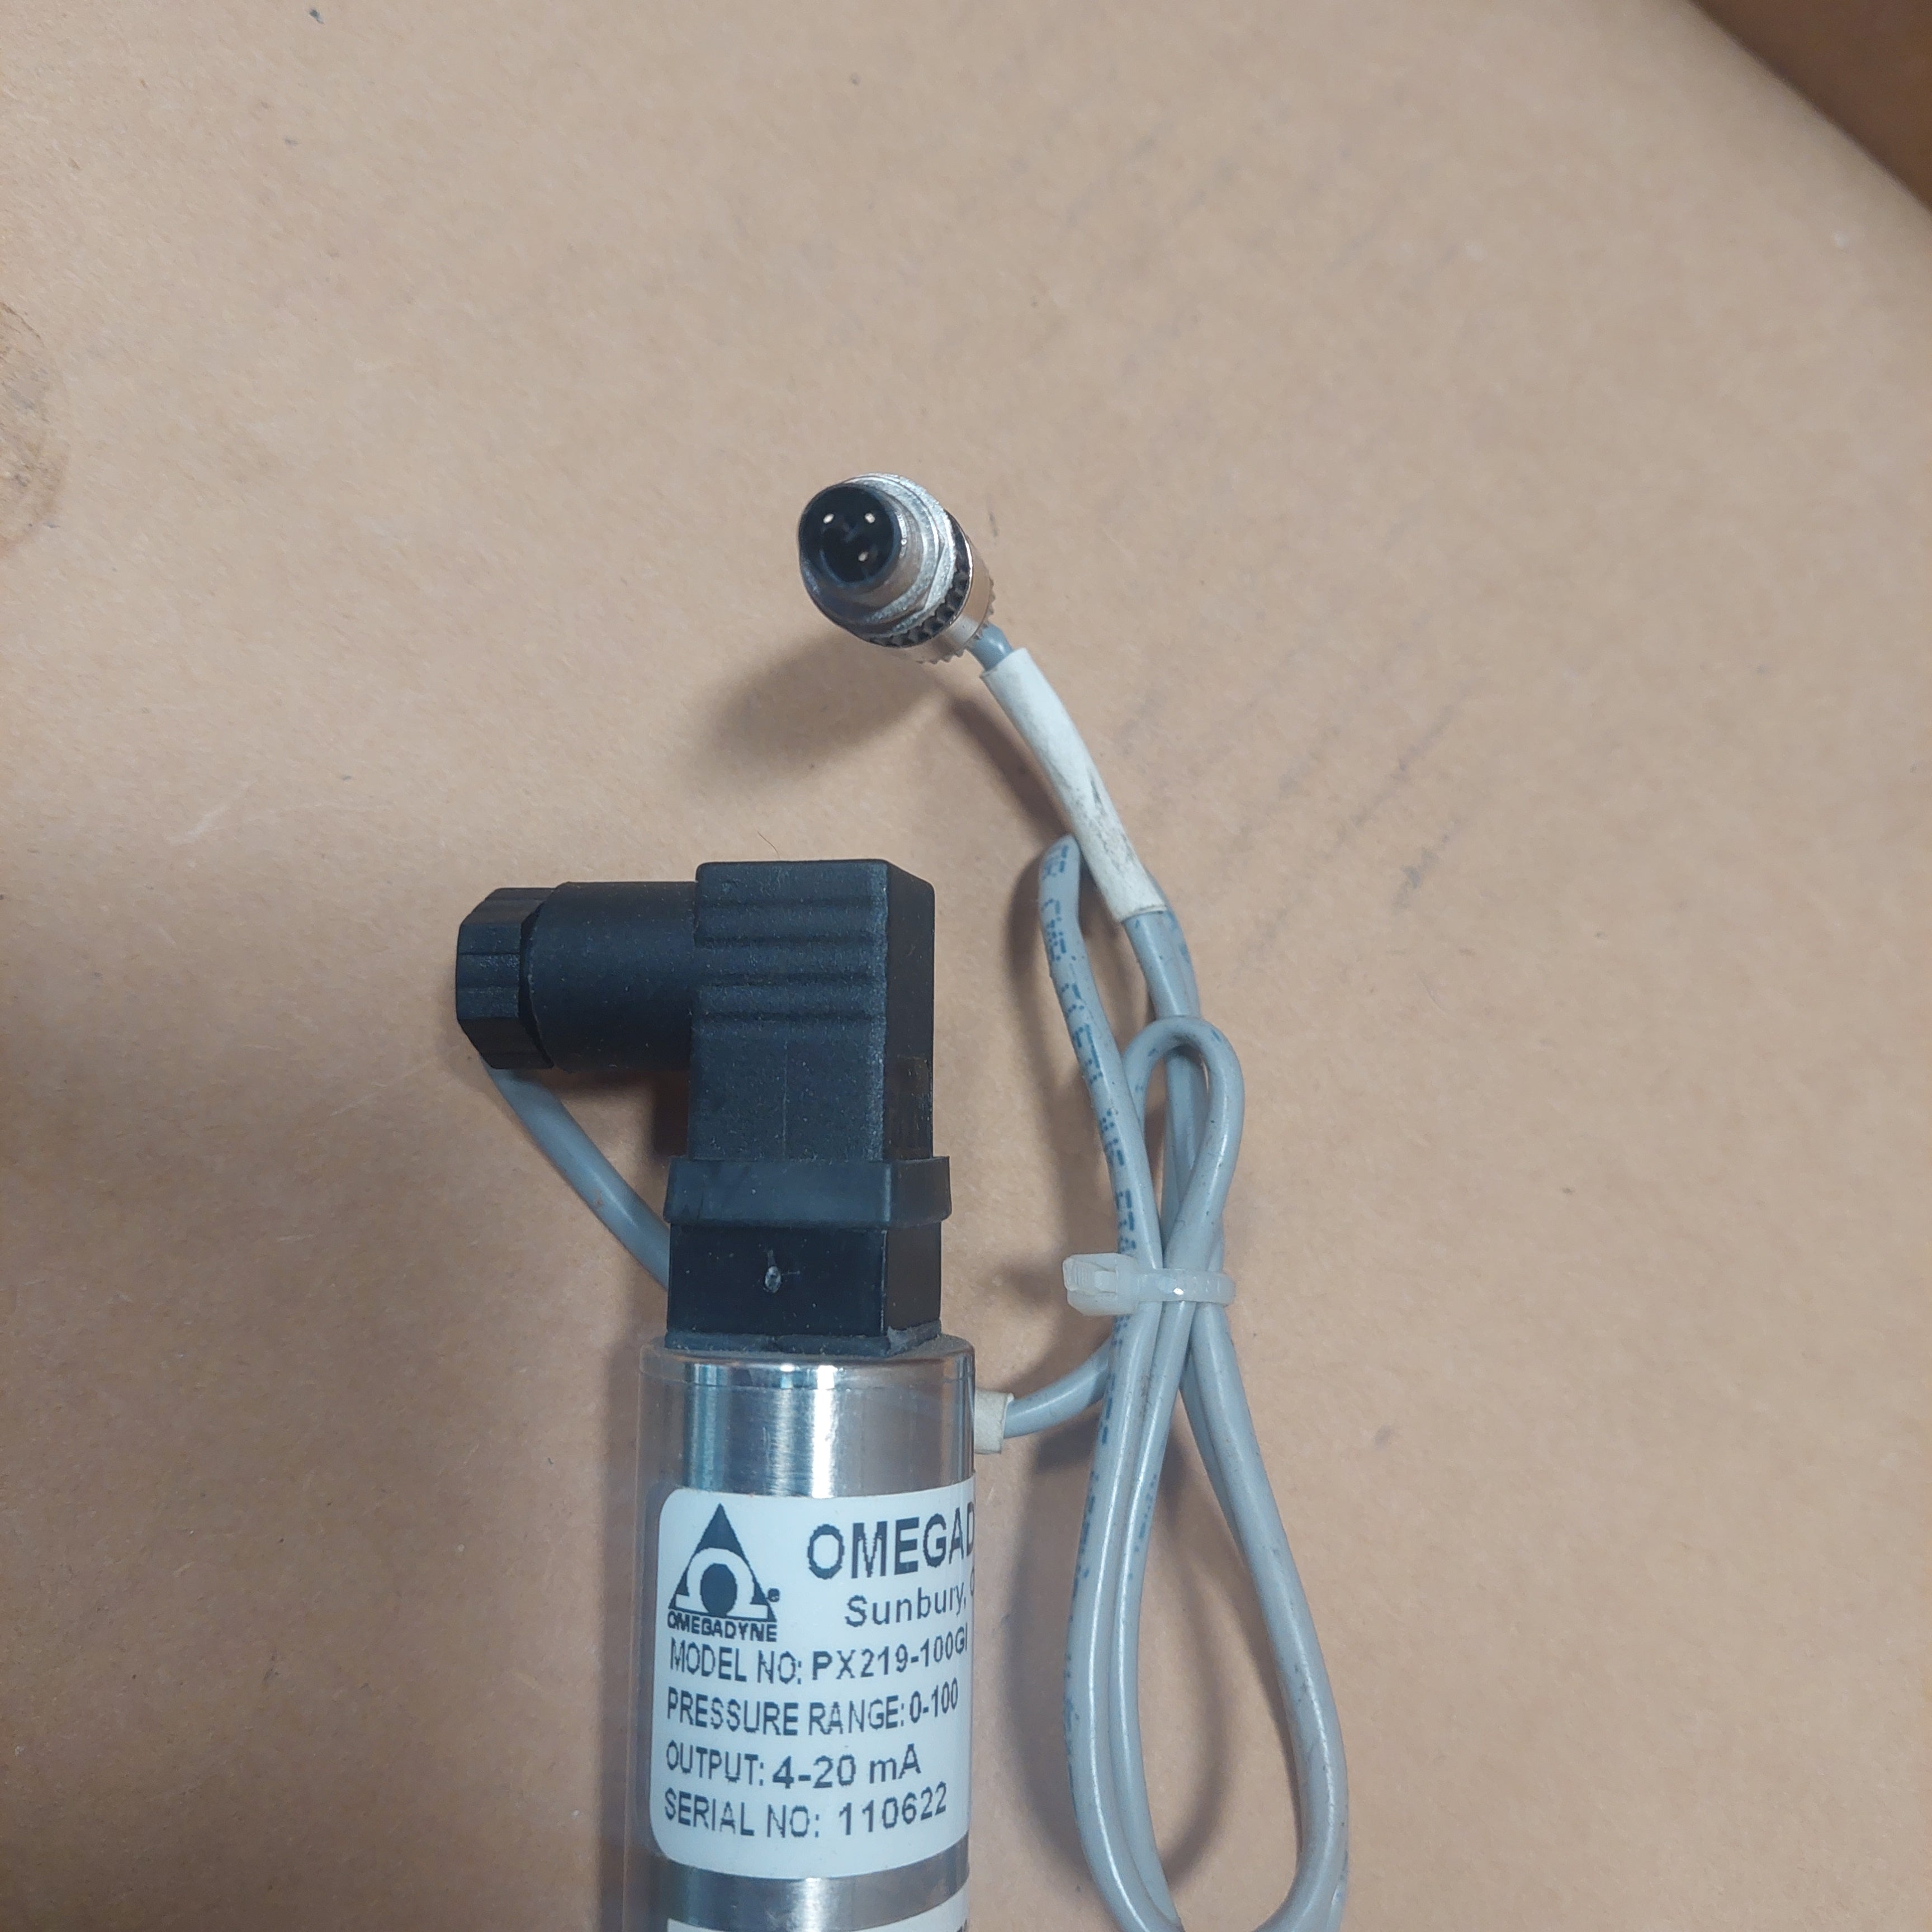 Omegadyne PX219-100GI Pressure Transducer (0-100 psi) w/ Interface Cable Used